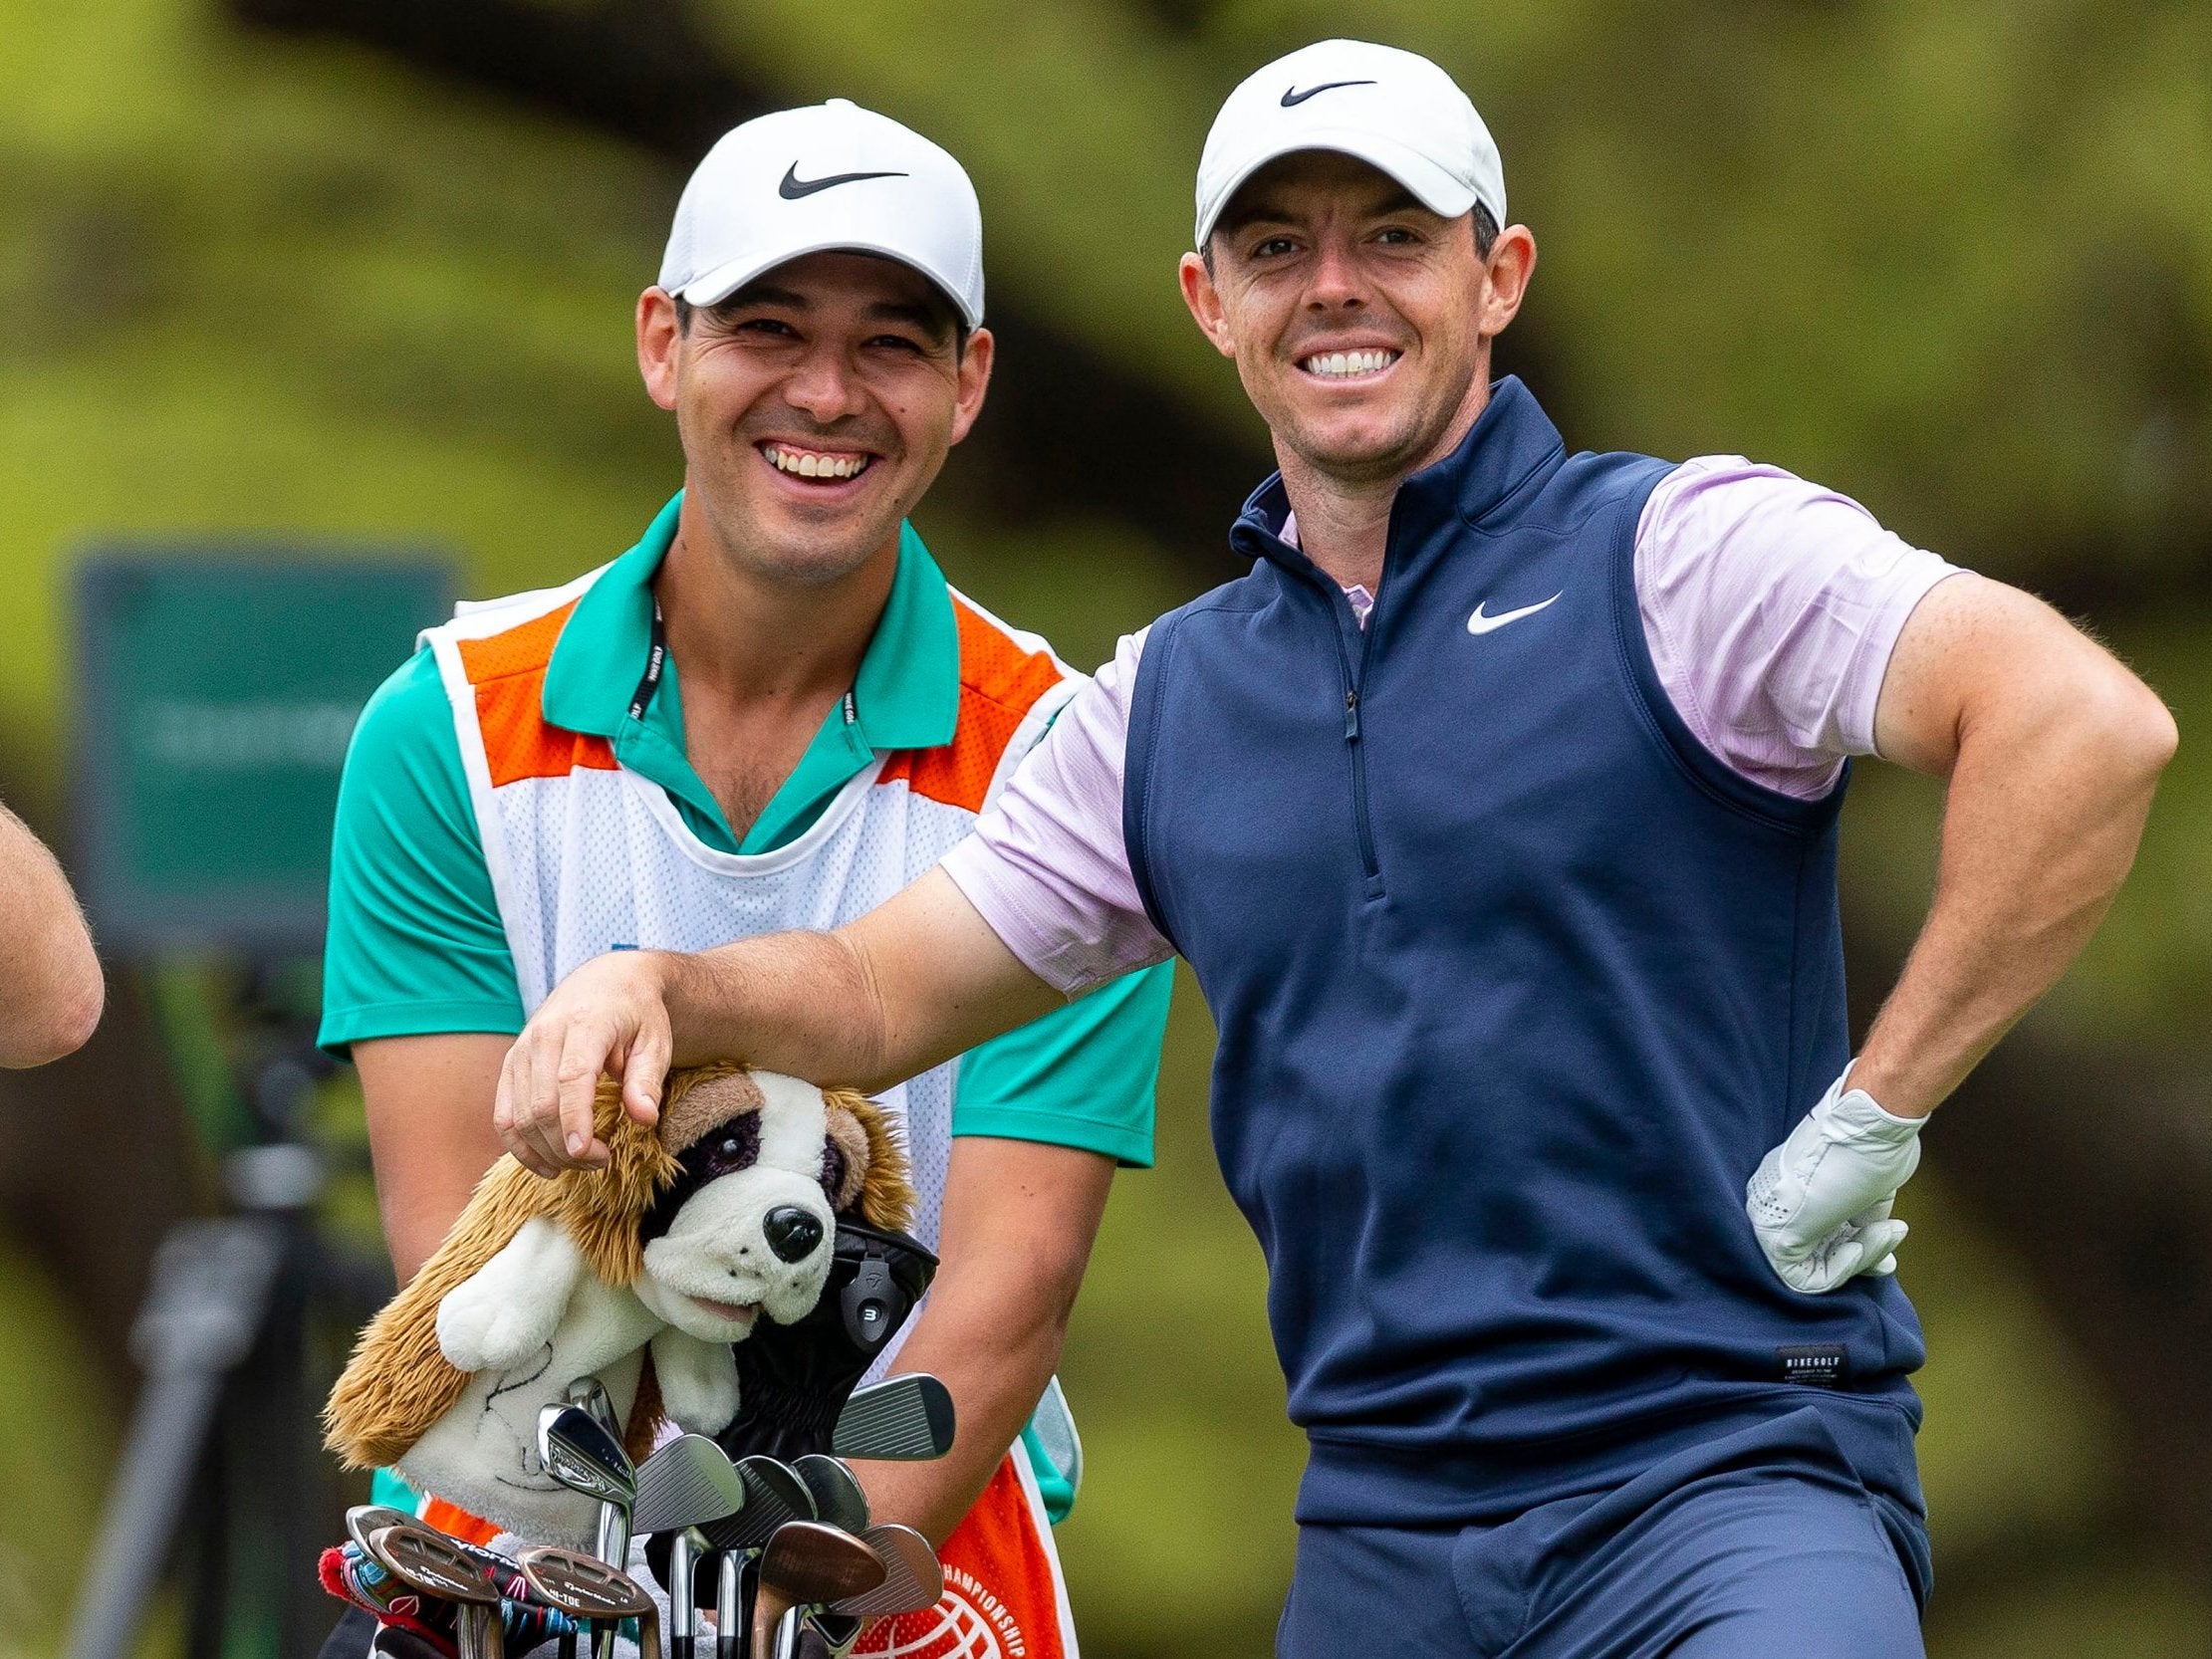 Rory McIlroy has been in imperious form throughout the WGC Match Play